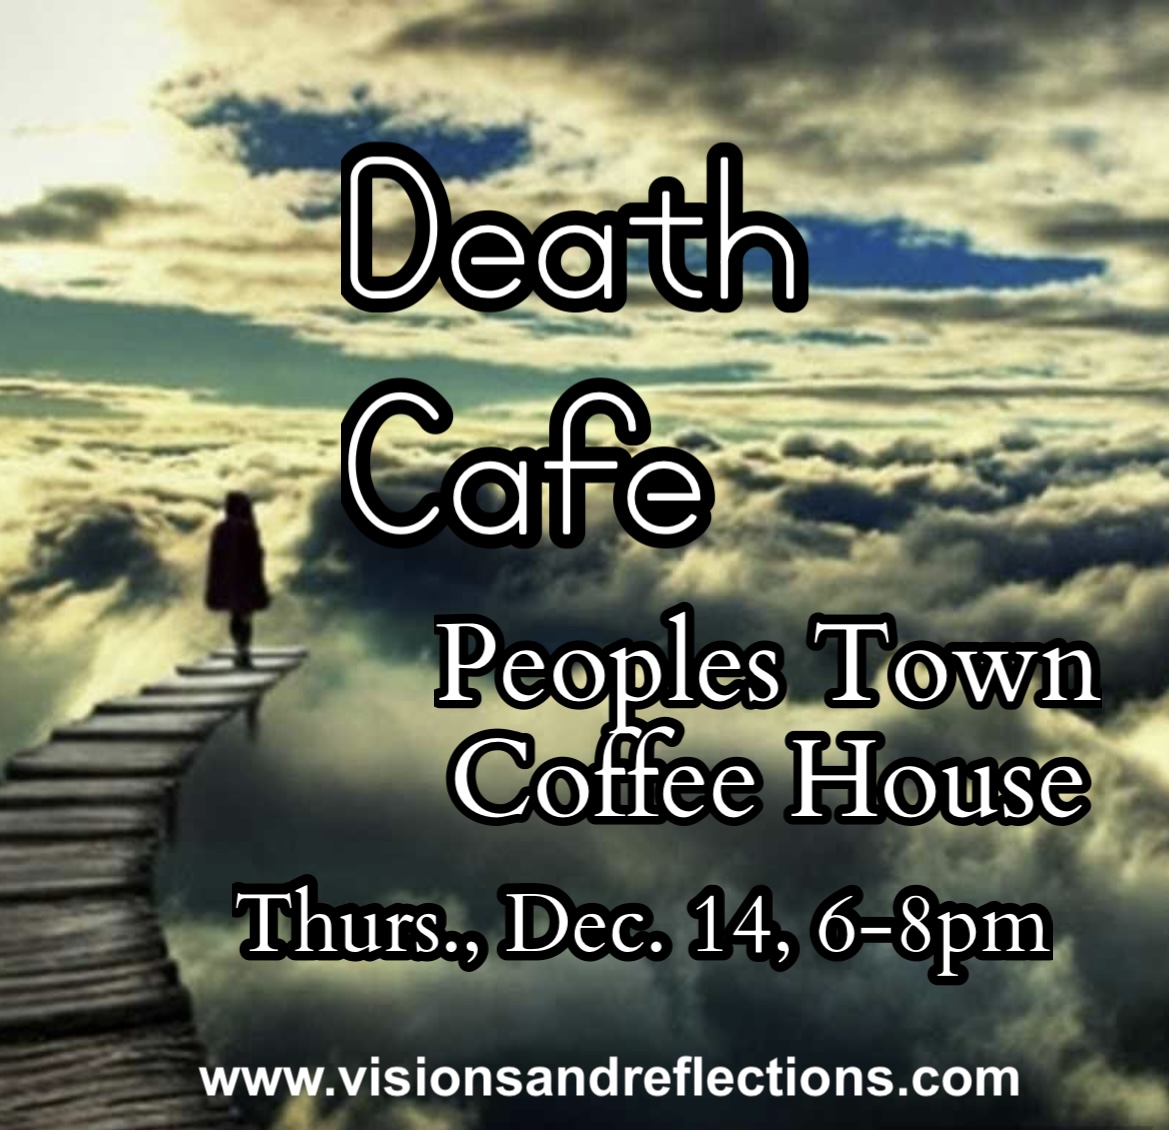 Atlanta Death Cafe at Peoples Town Coffee Bar